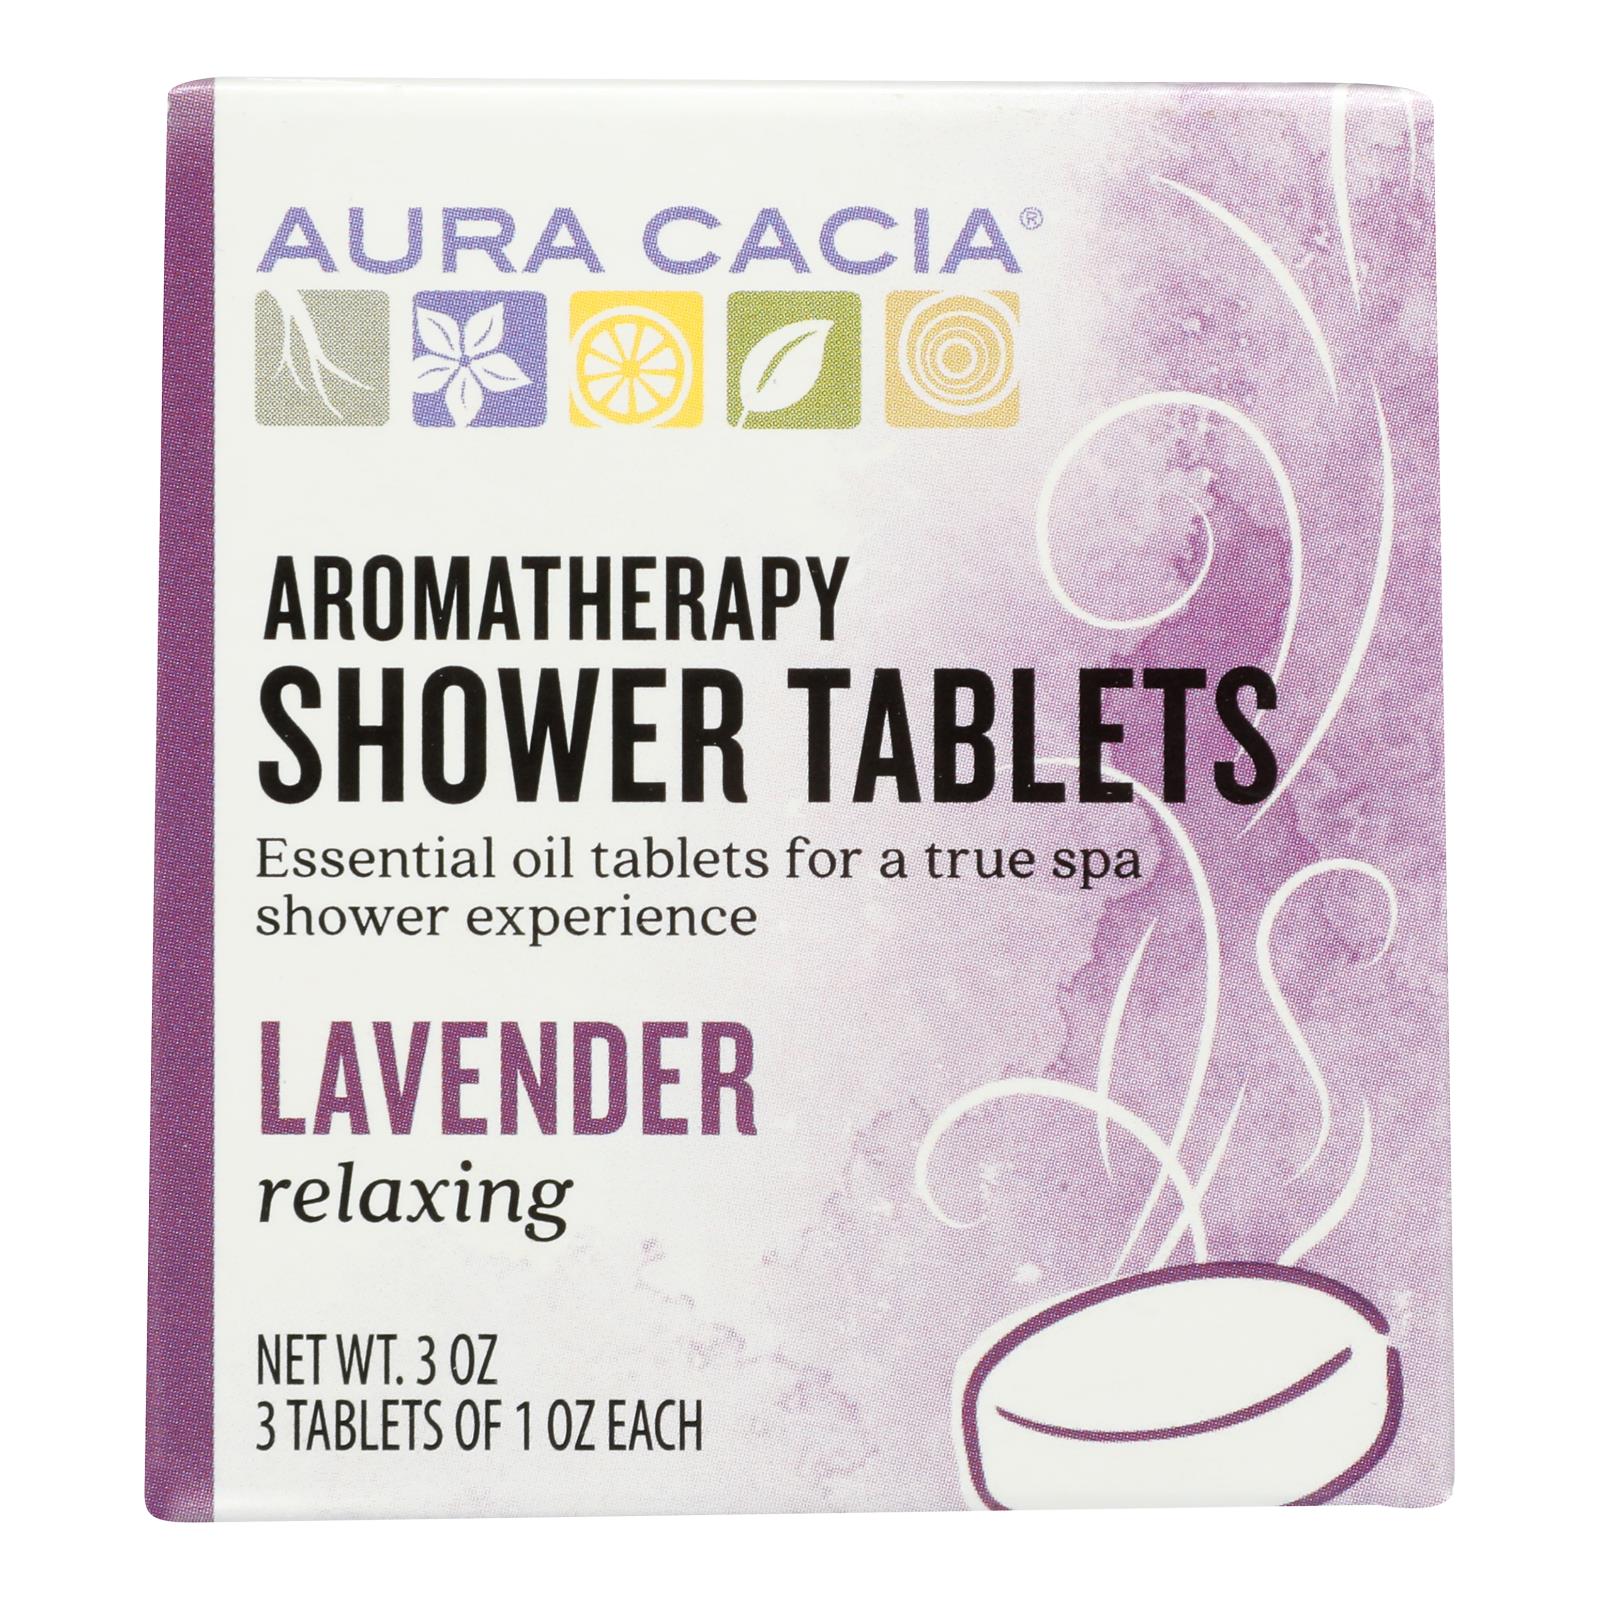 Aura Cacia - Aromatherapy Shower Tablets Relaxing Lavender - 3 Tablets